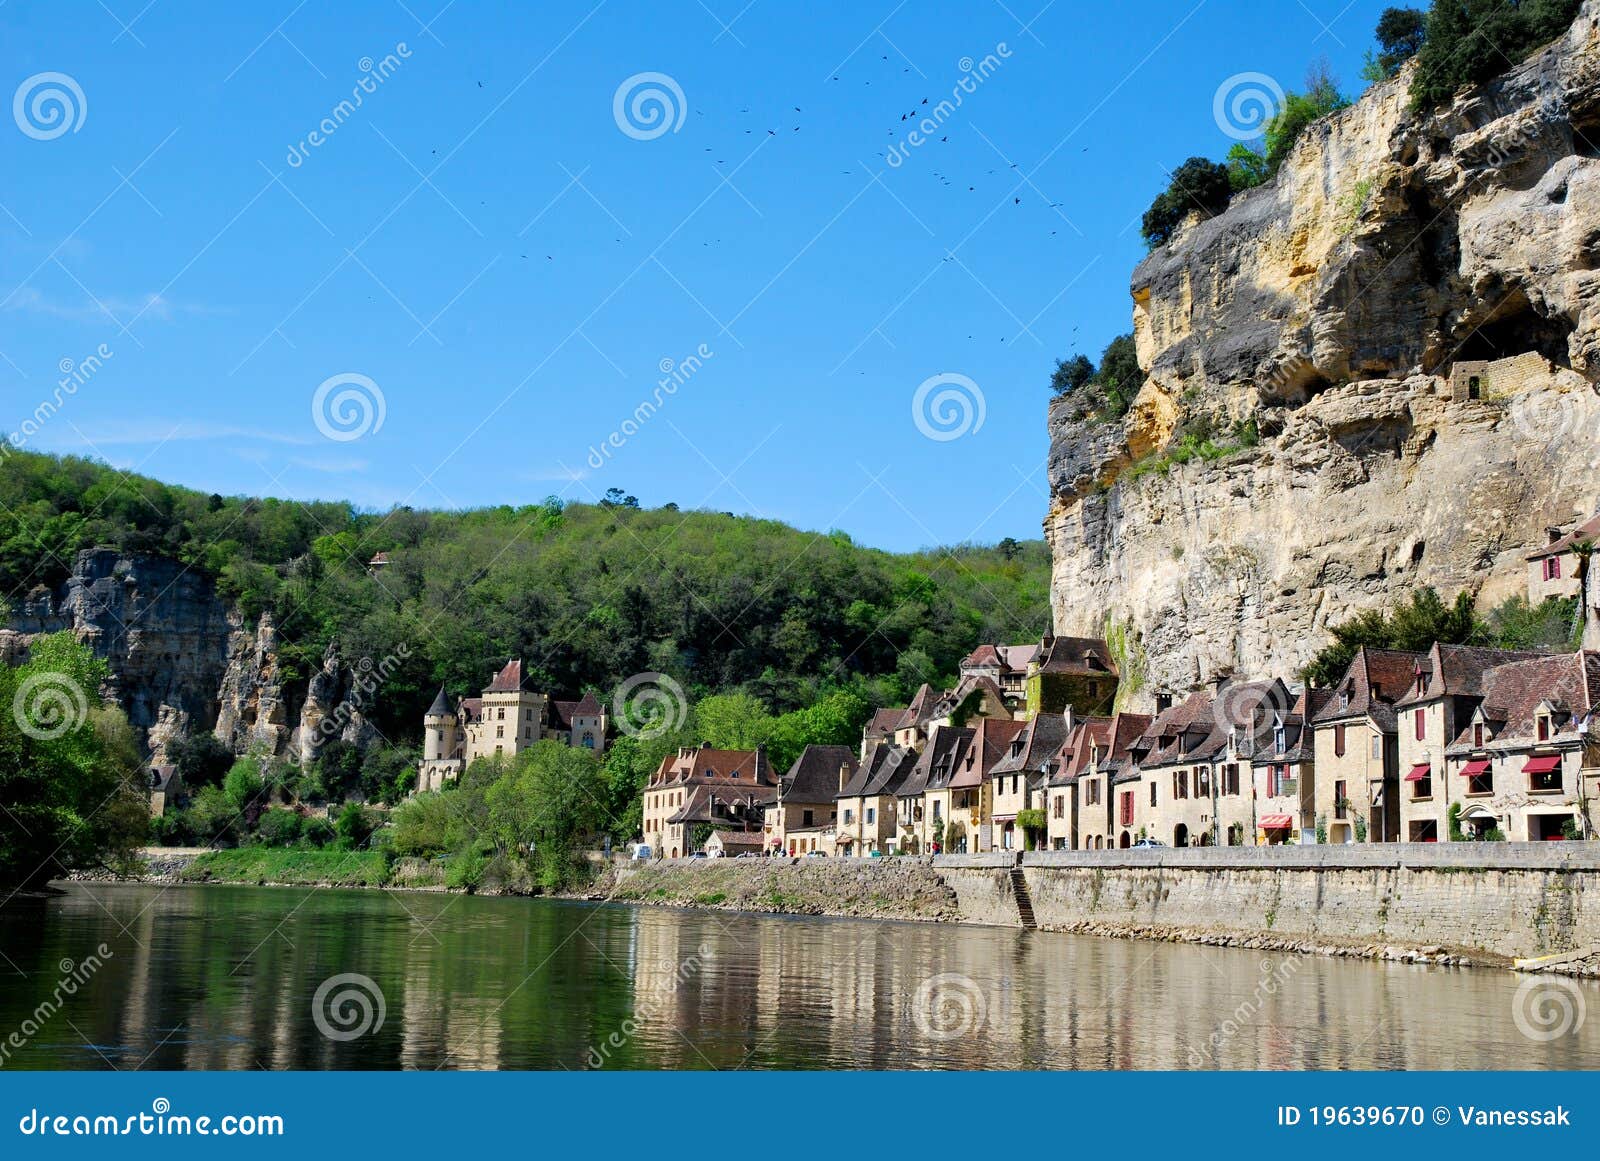 houses of la roque gageac in france